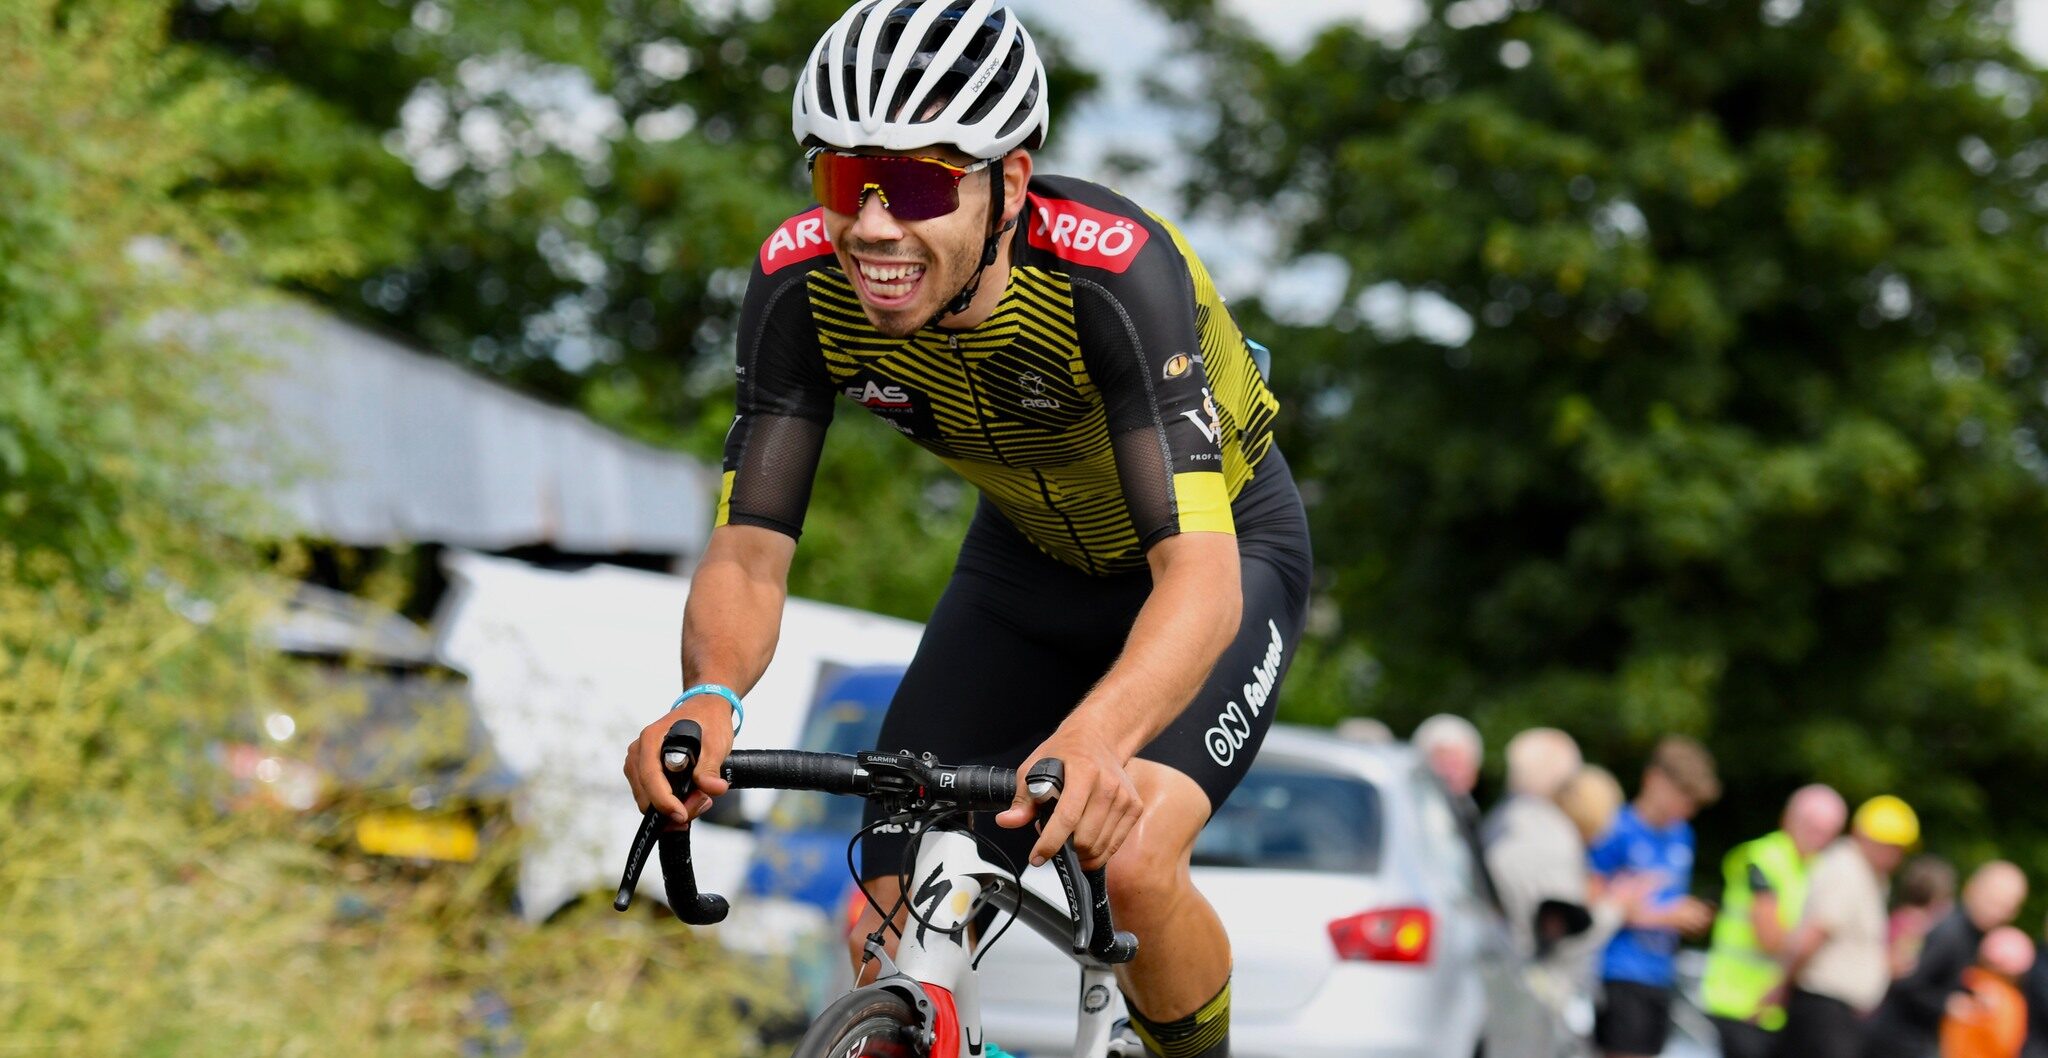 Leo Doyle (23) defers college studies for UCI Conti team contract